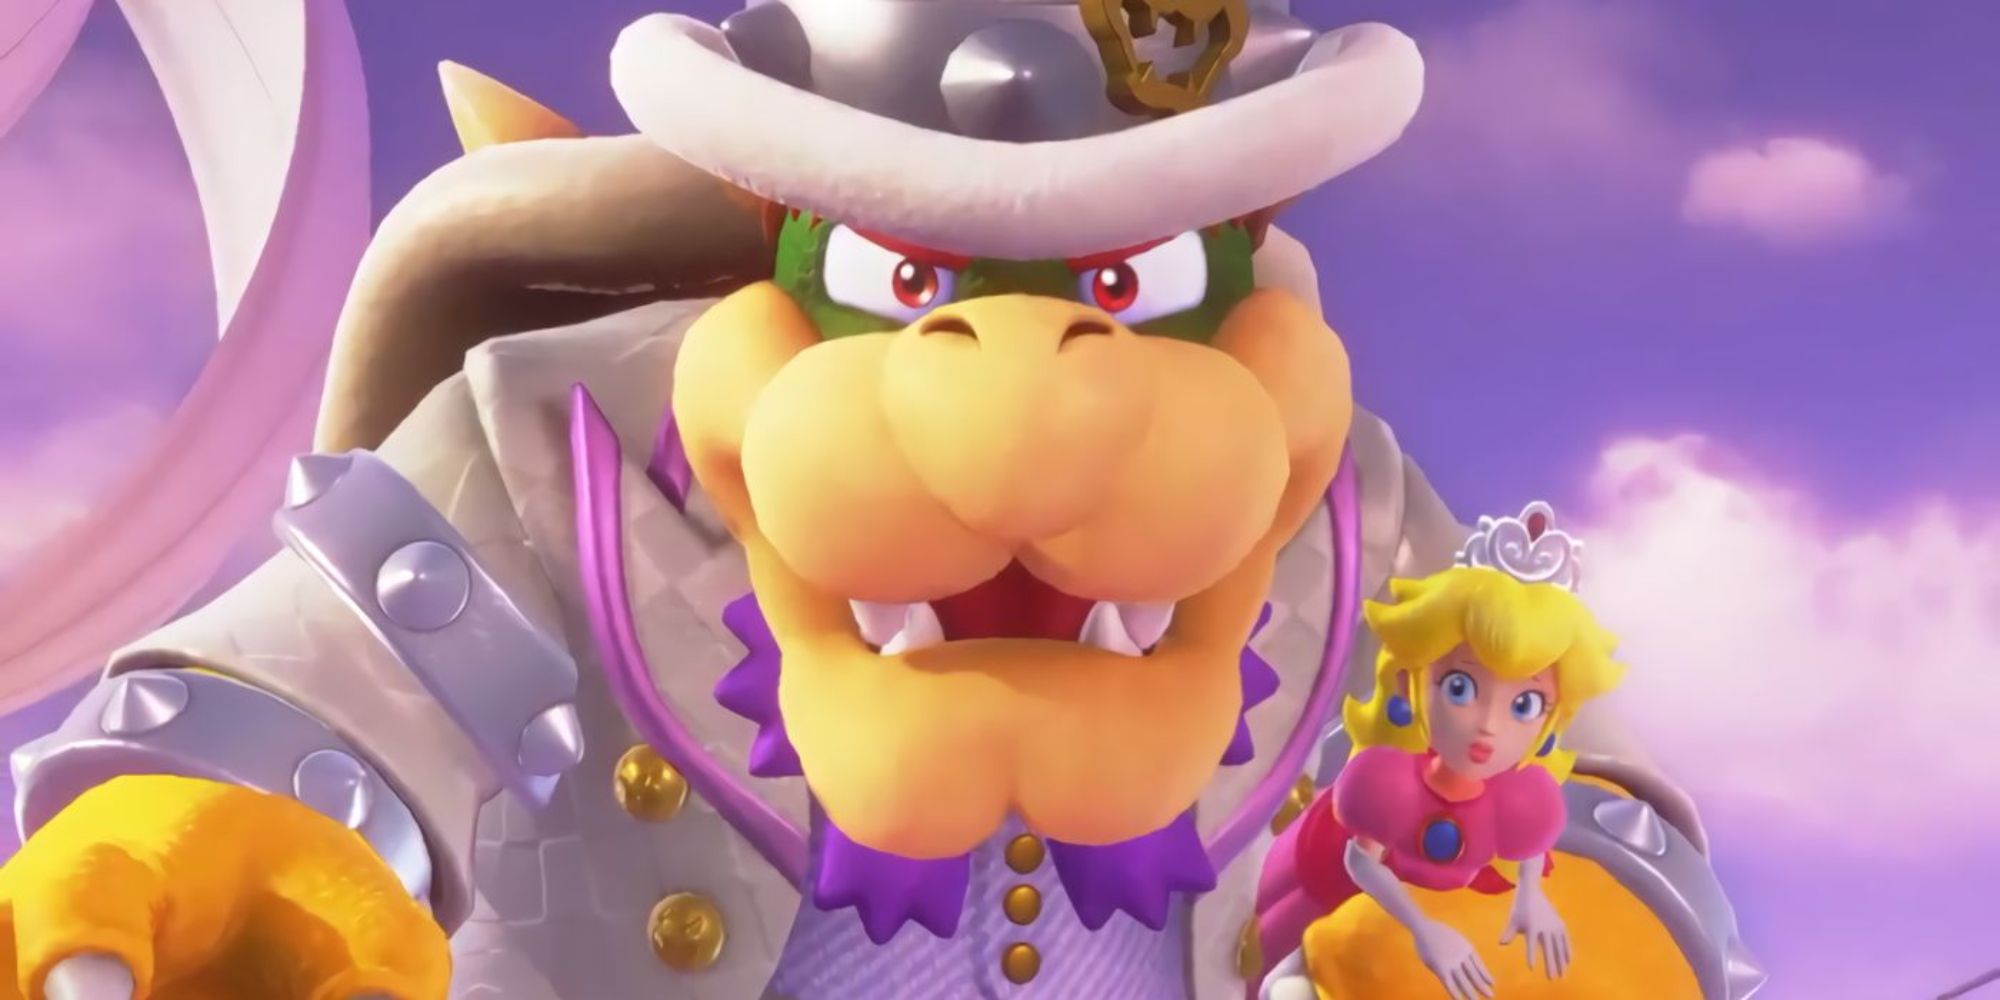 Super Mario Odyssey Screenshot Of Bowser trying to marry Peach